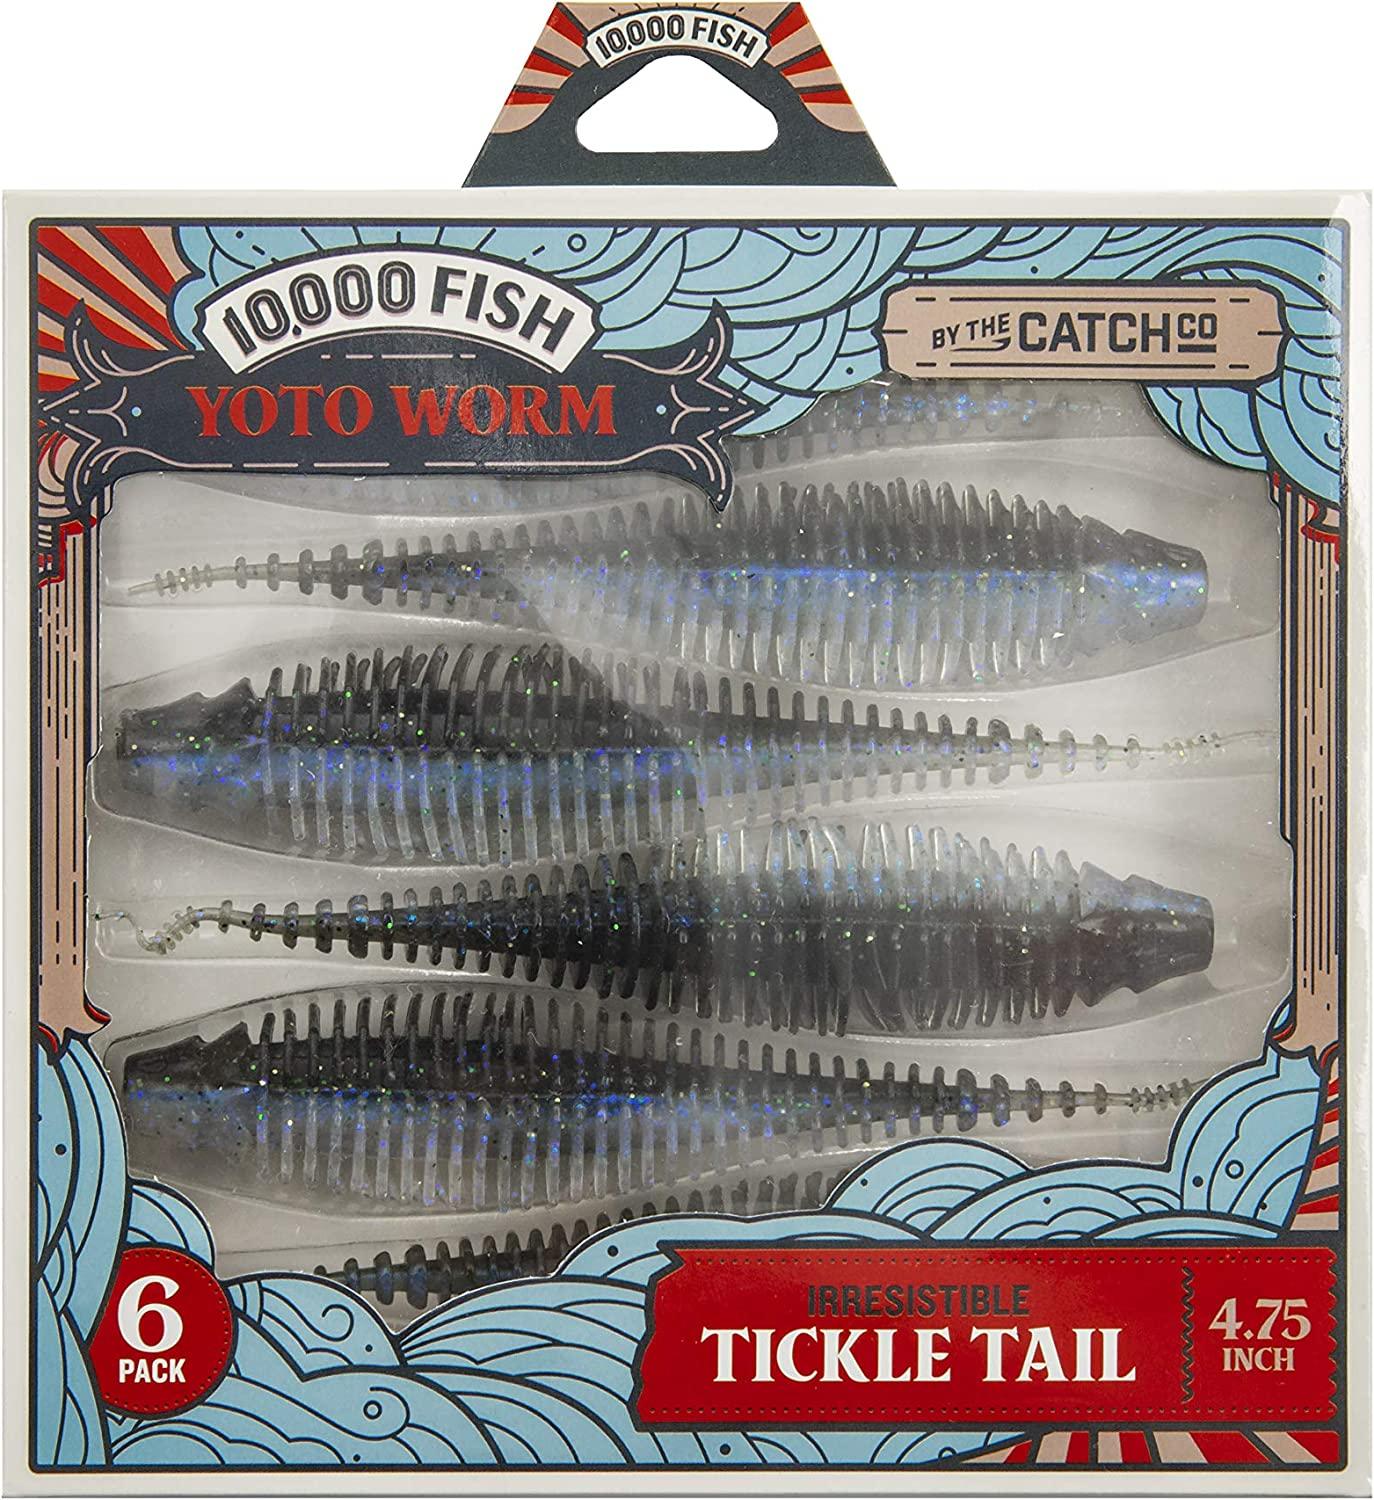  Zoom Bait Finesse Worm Bait-Pack of 20 (Bait Fish, 4.75-Inch)  : Fishing Soft Plastic Lures : Sports & Outdoors